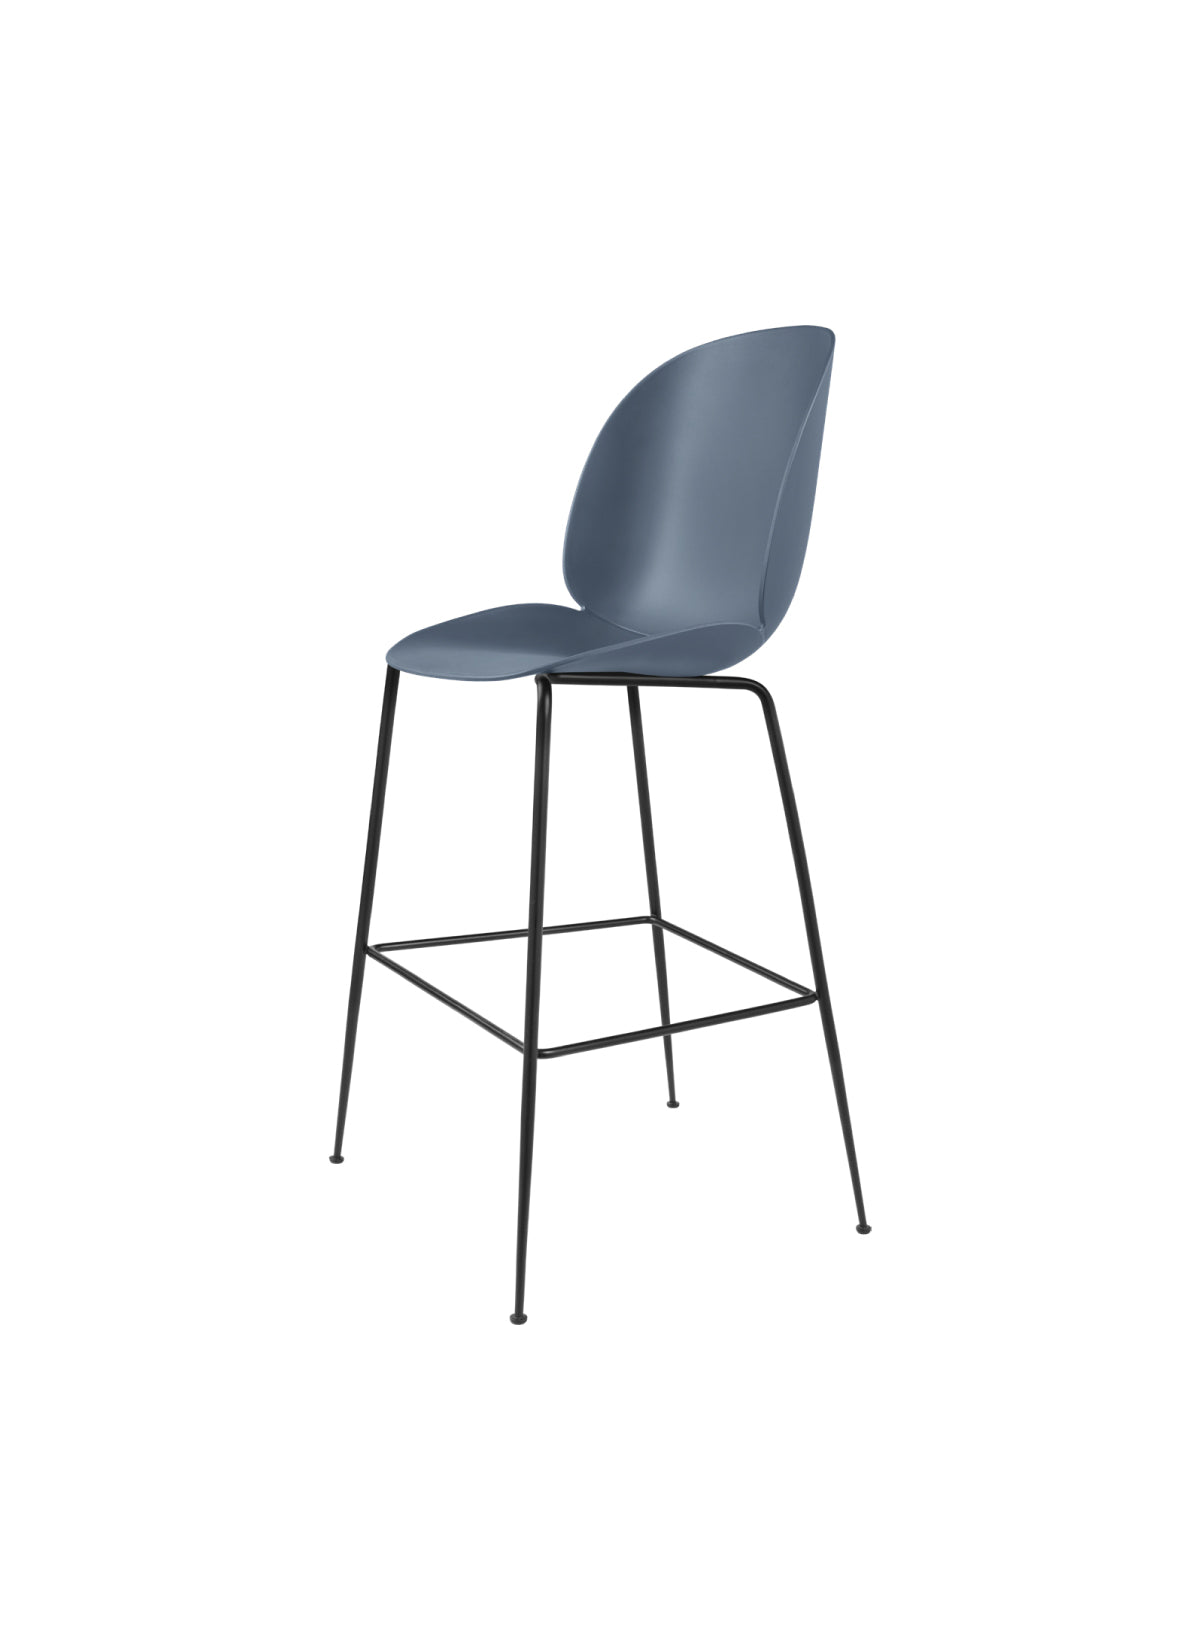 Beetle Bar Chair - Un-Upholstered - Conic Base by Gubi